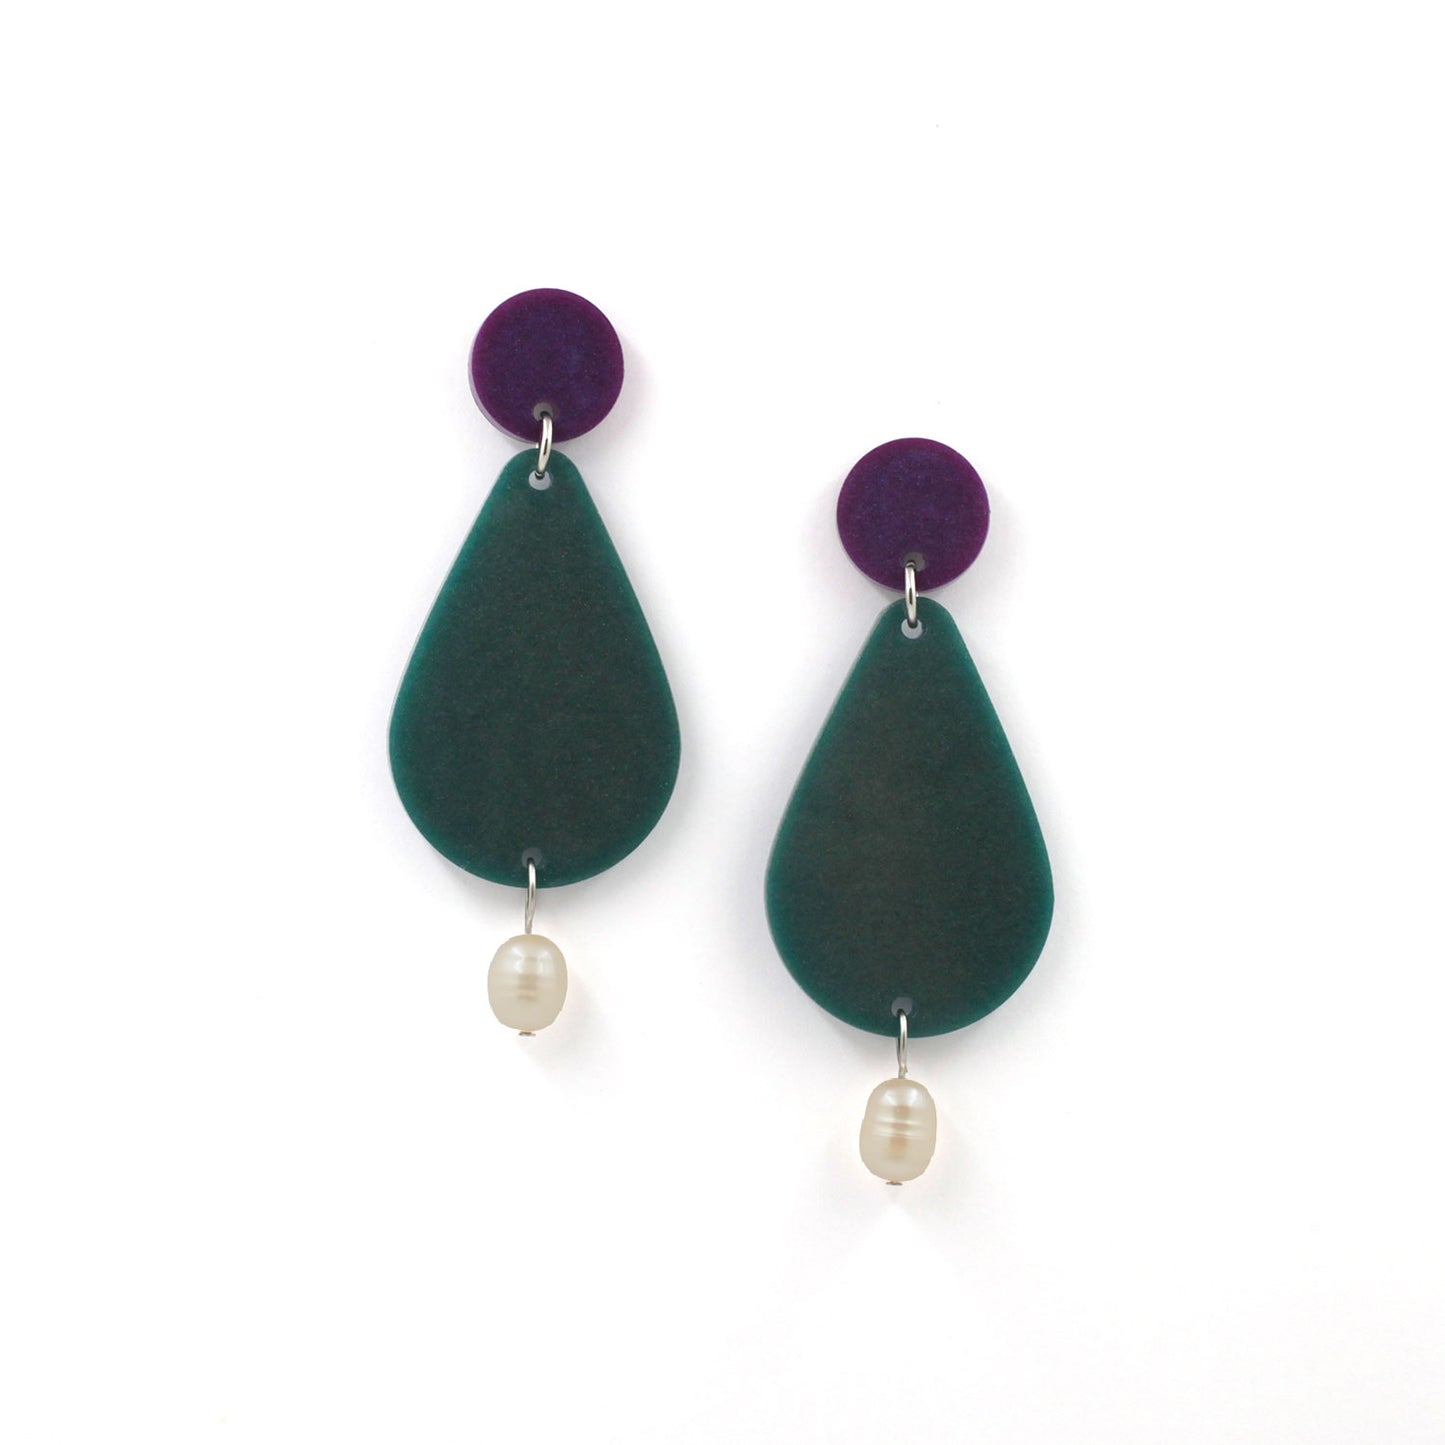 picture of earrings on a white background. the earrings are composed by a purple dot at the top, then a bigger green pear shape and a freshwater pearls at the bottom hanging.